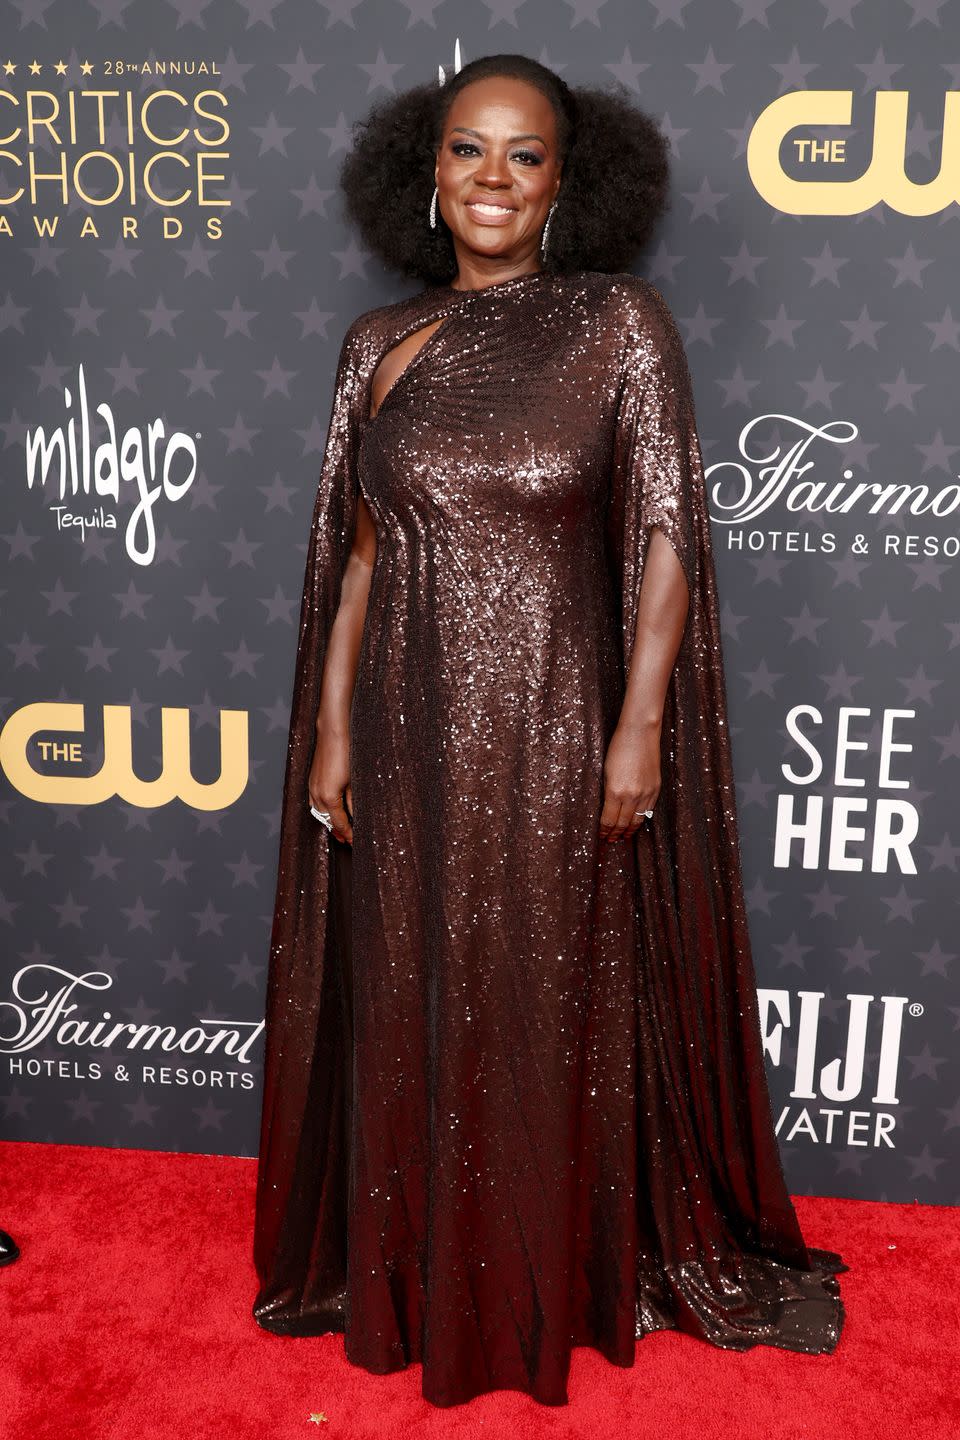 <p>Viola Davis and Valentino, a dream combination. The actress looked beautiful in a brown sequin caped dress by the house, which was custom designed for her, and featured a subtle cut-out detail on the shoulder.</p>